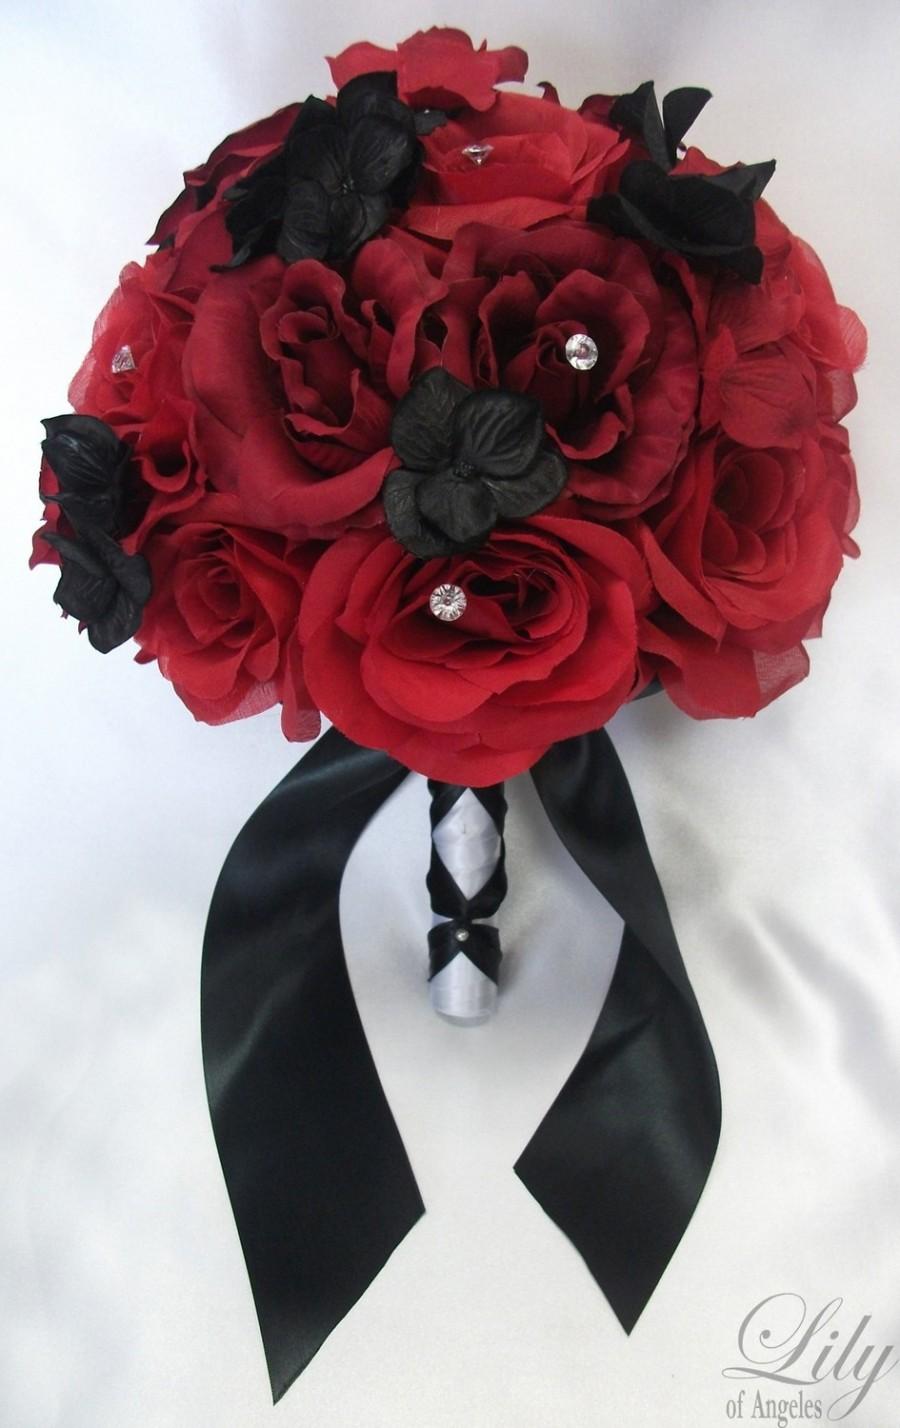 Mariage - 17 Piece Package Wedding Bridal Bride Maid Of Honor Bridesmaid Bouquet Boutonniere Corsage Silk Flower RED BLACK "Lily Of Angeles" REBK03